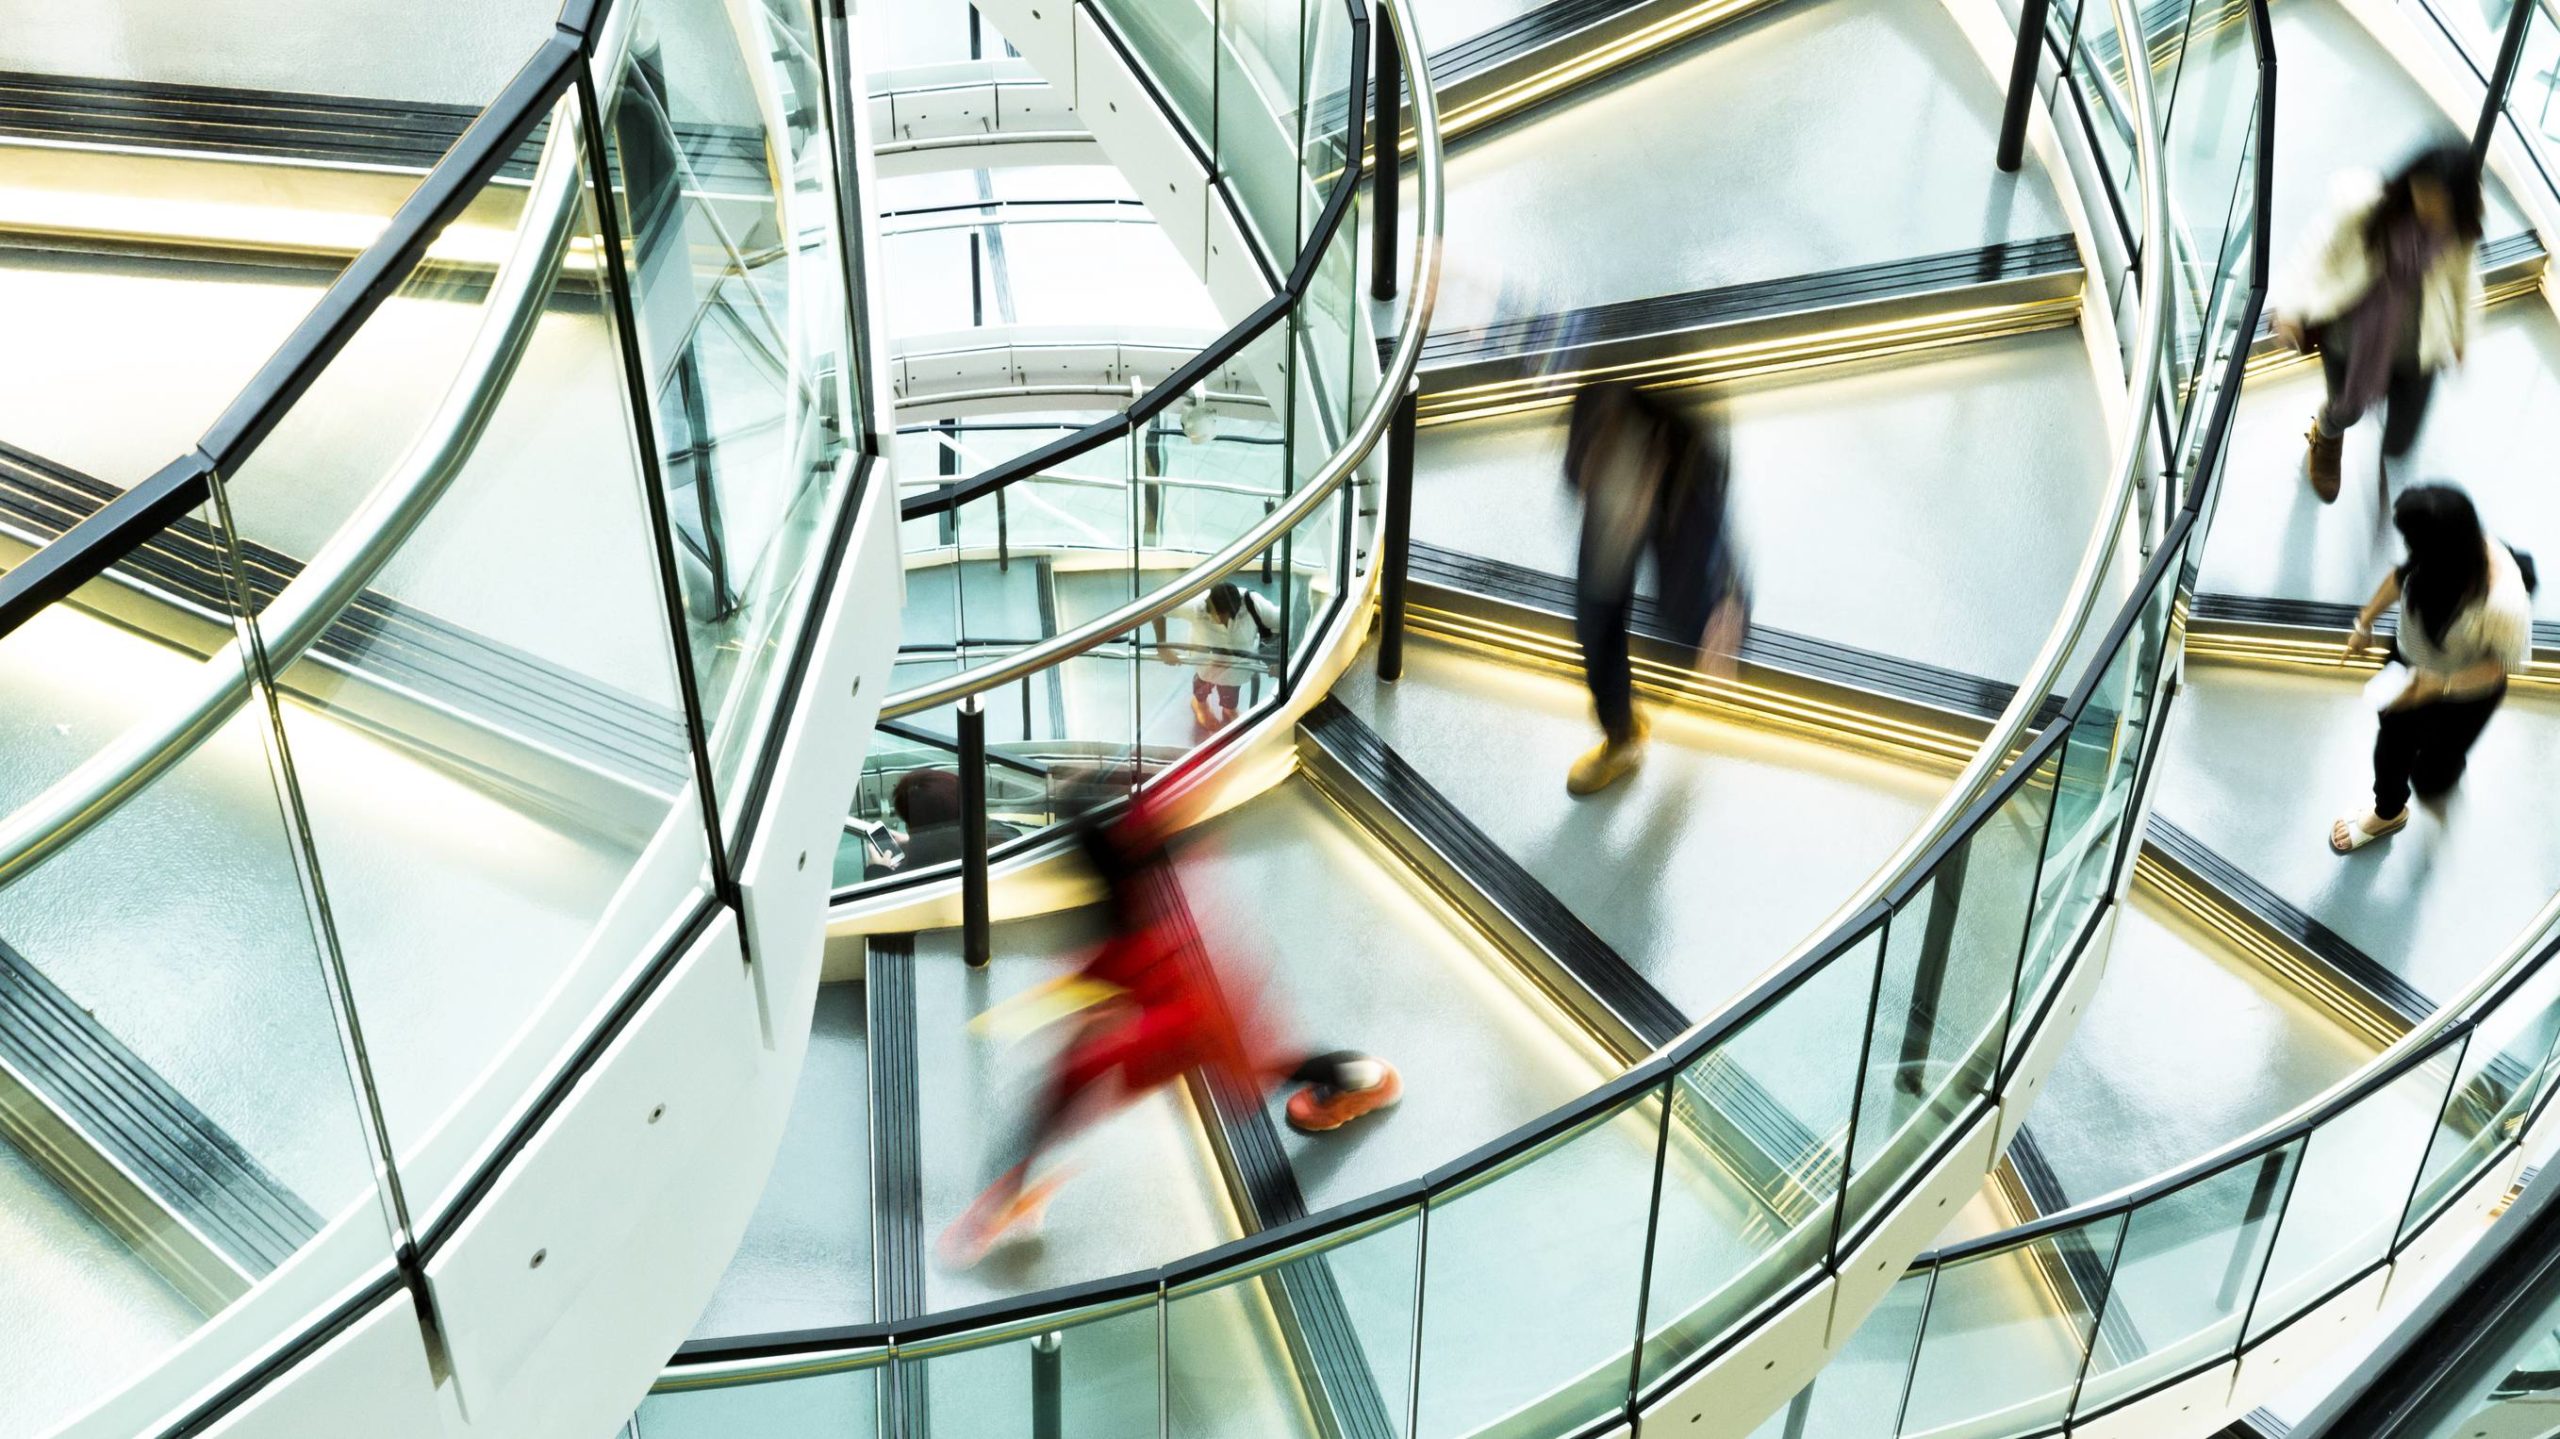 An out of focus aerial view of people going up and down a glass spiral staircase.